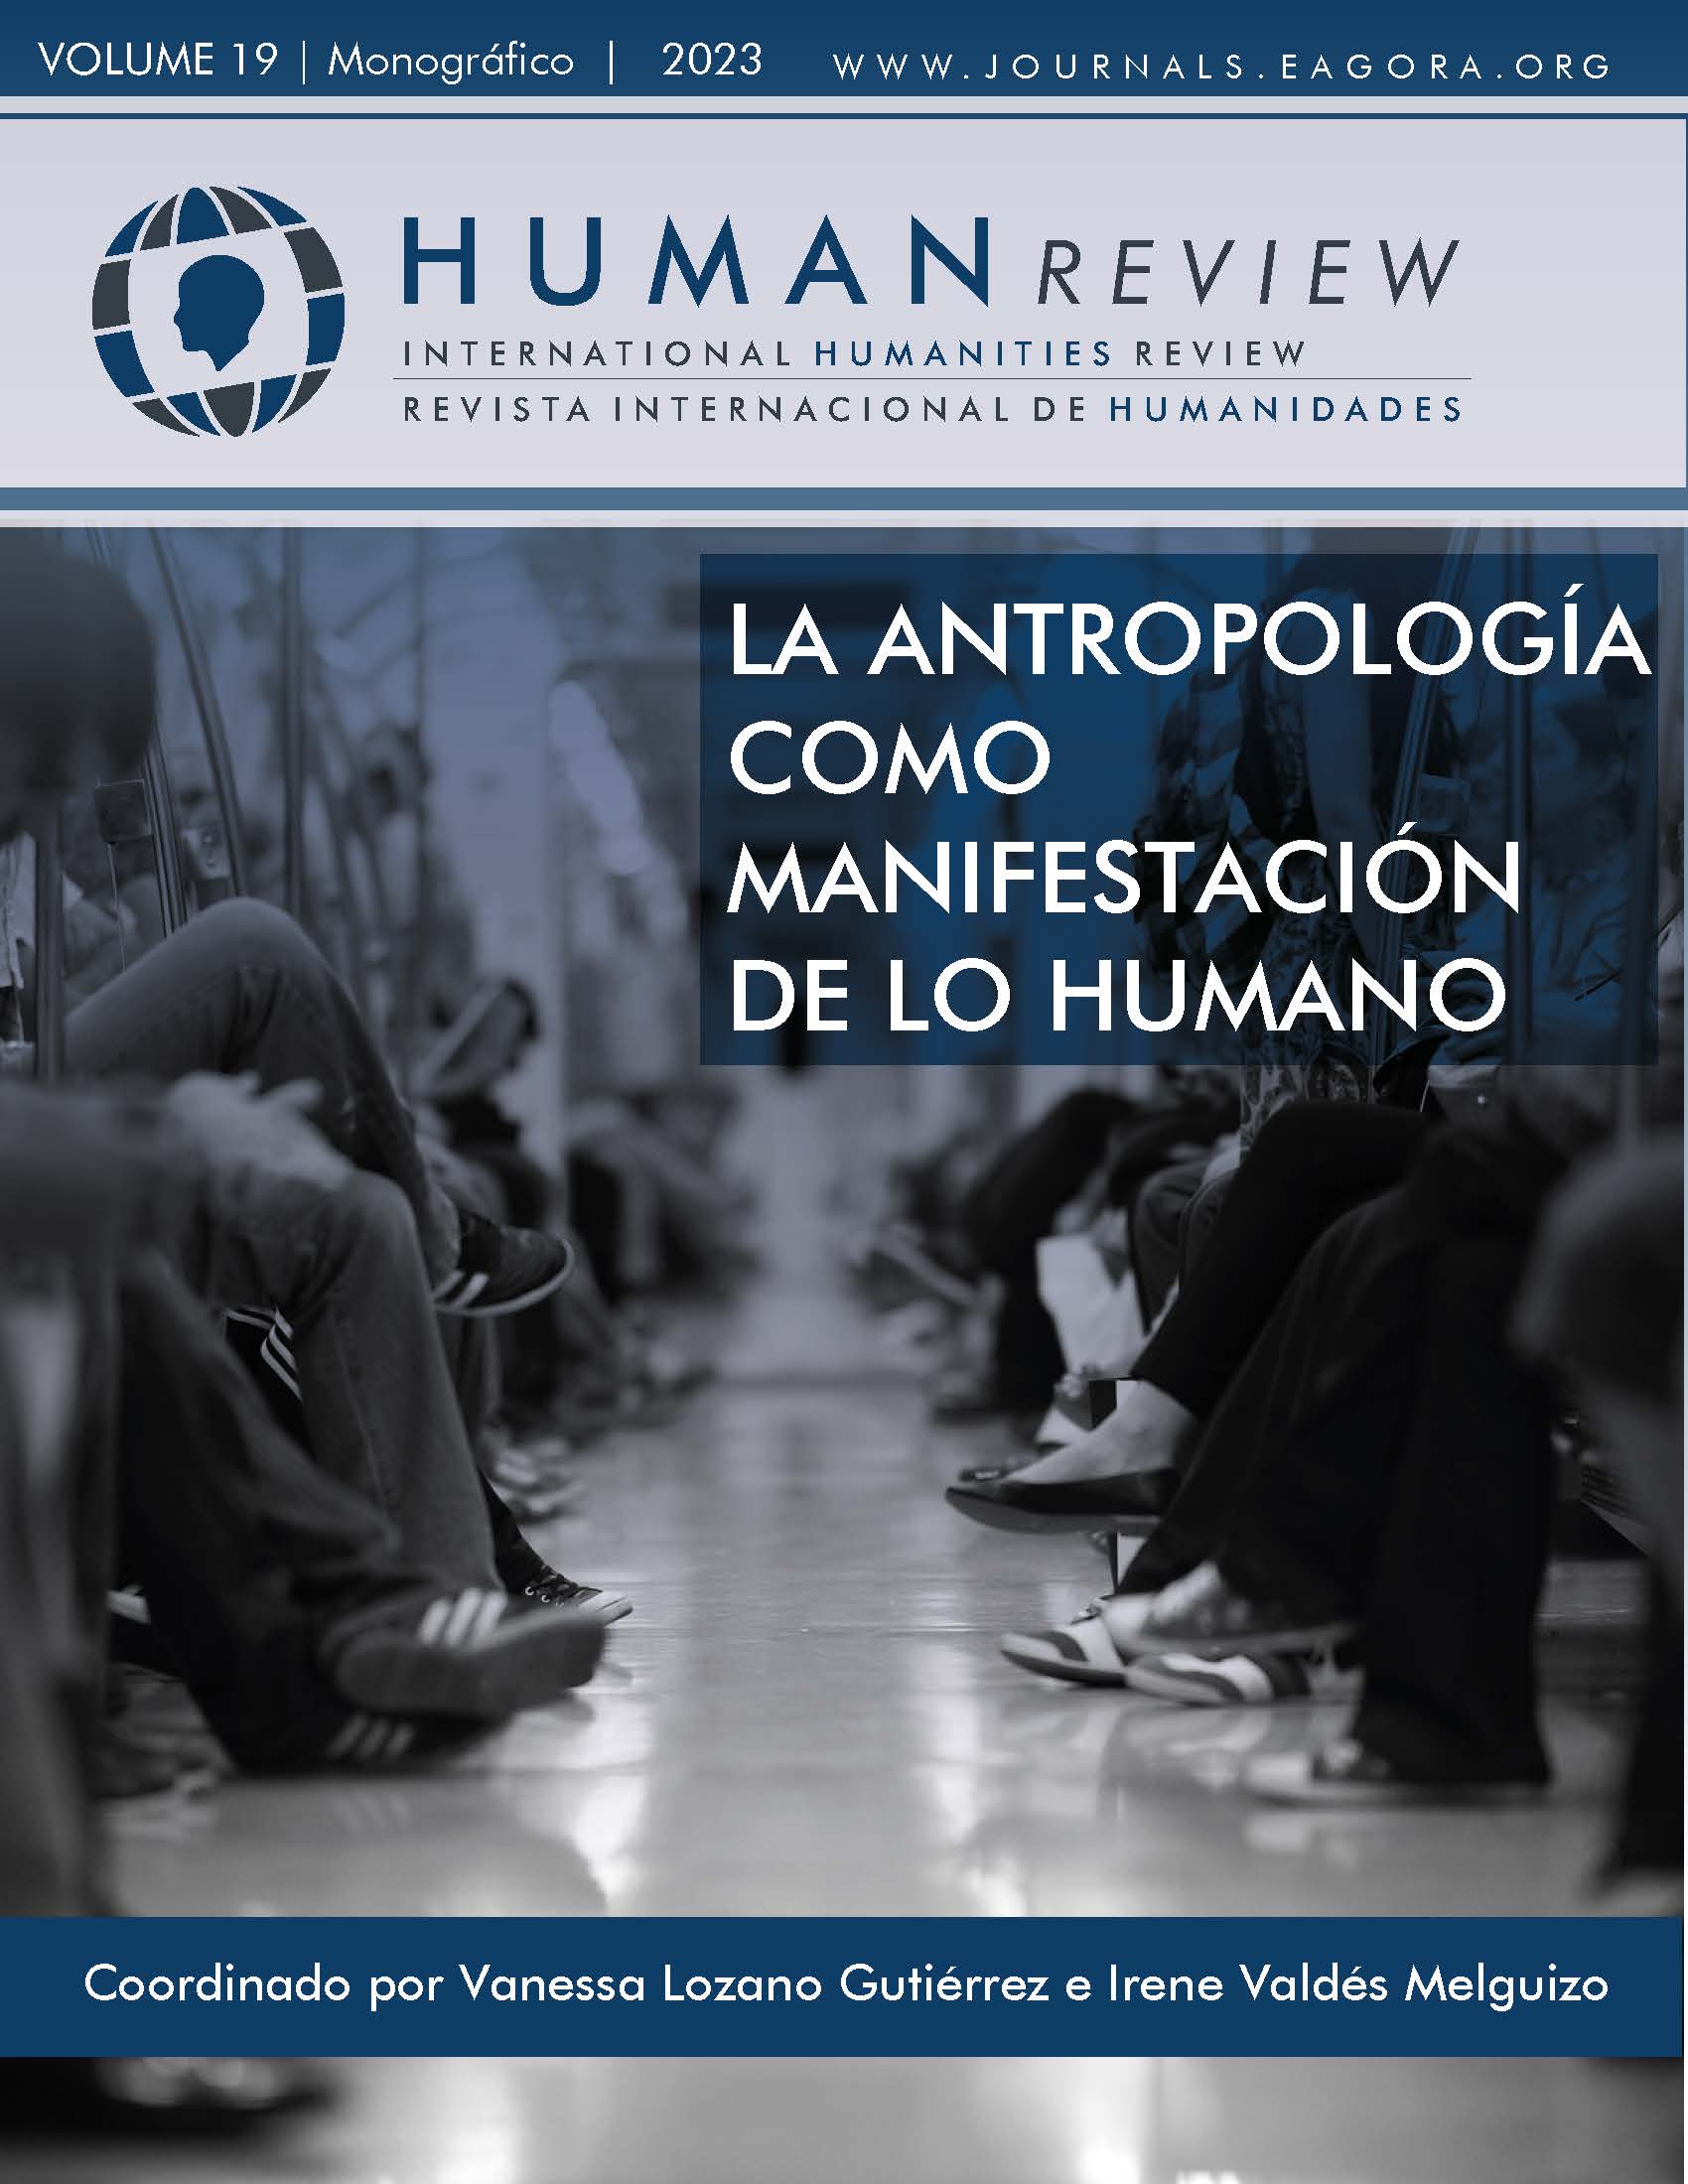 					View Vol. 19 No. 5 (2023): Monograph: "Anthropology as a manifestation of what is human"
				